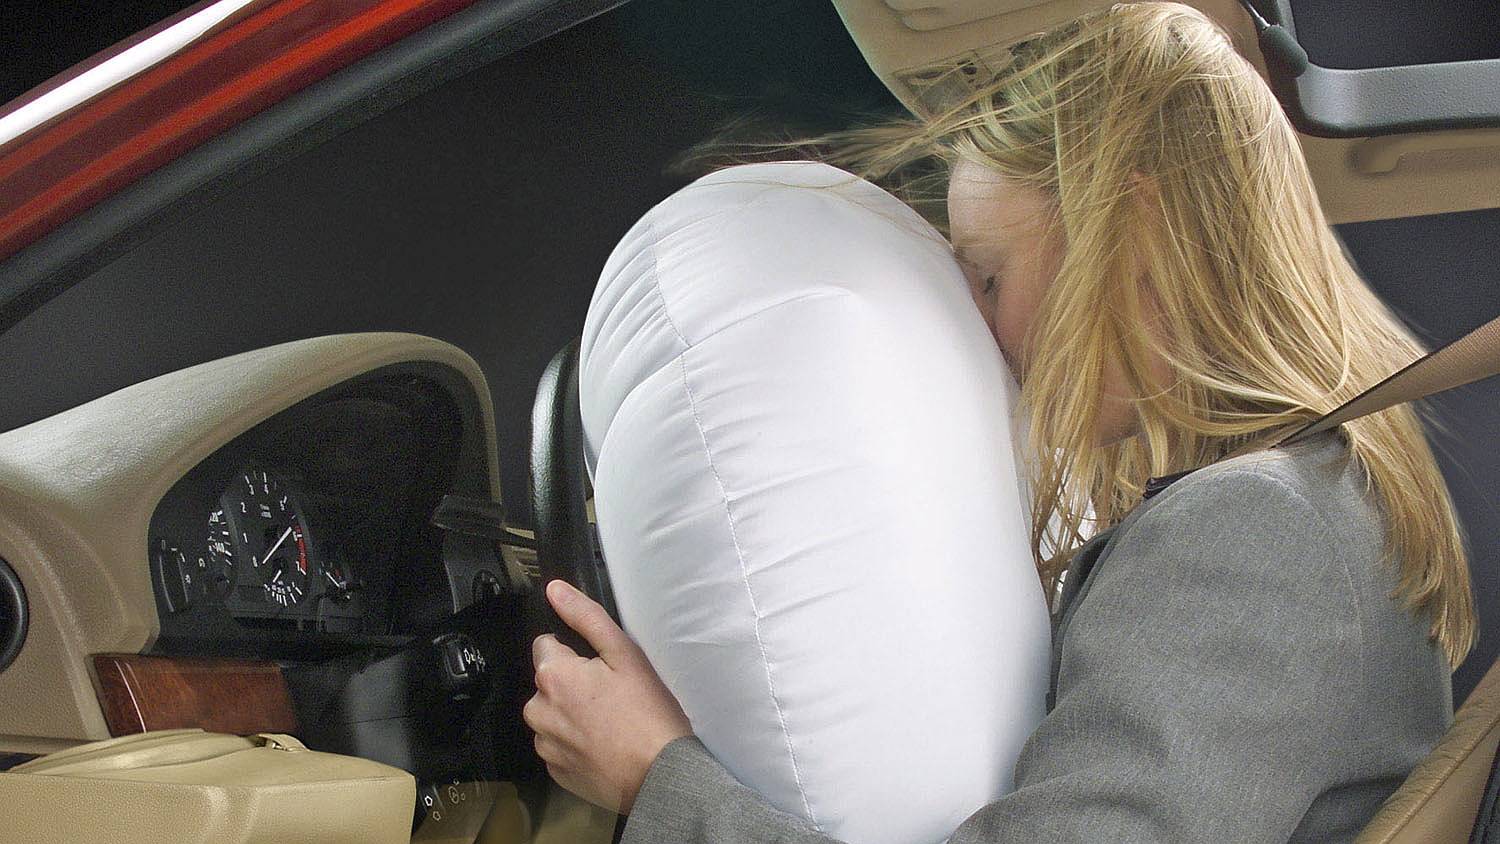 Airbag Safety for Short Drivers: Risks & Tips to Stay Safe